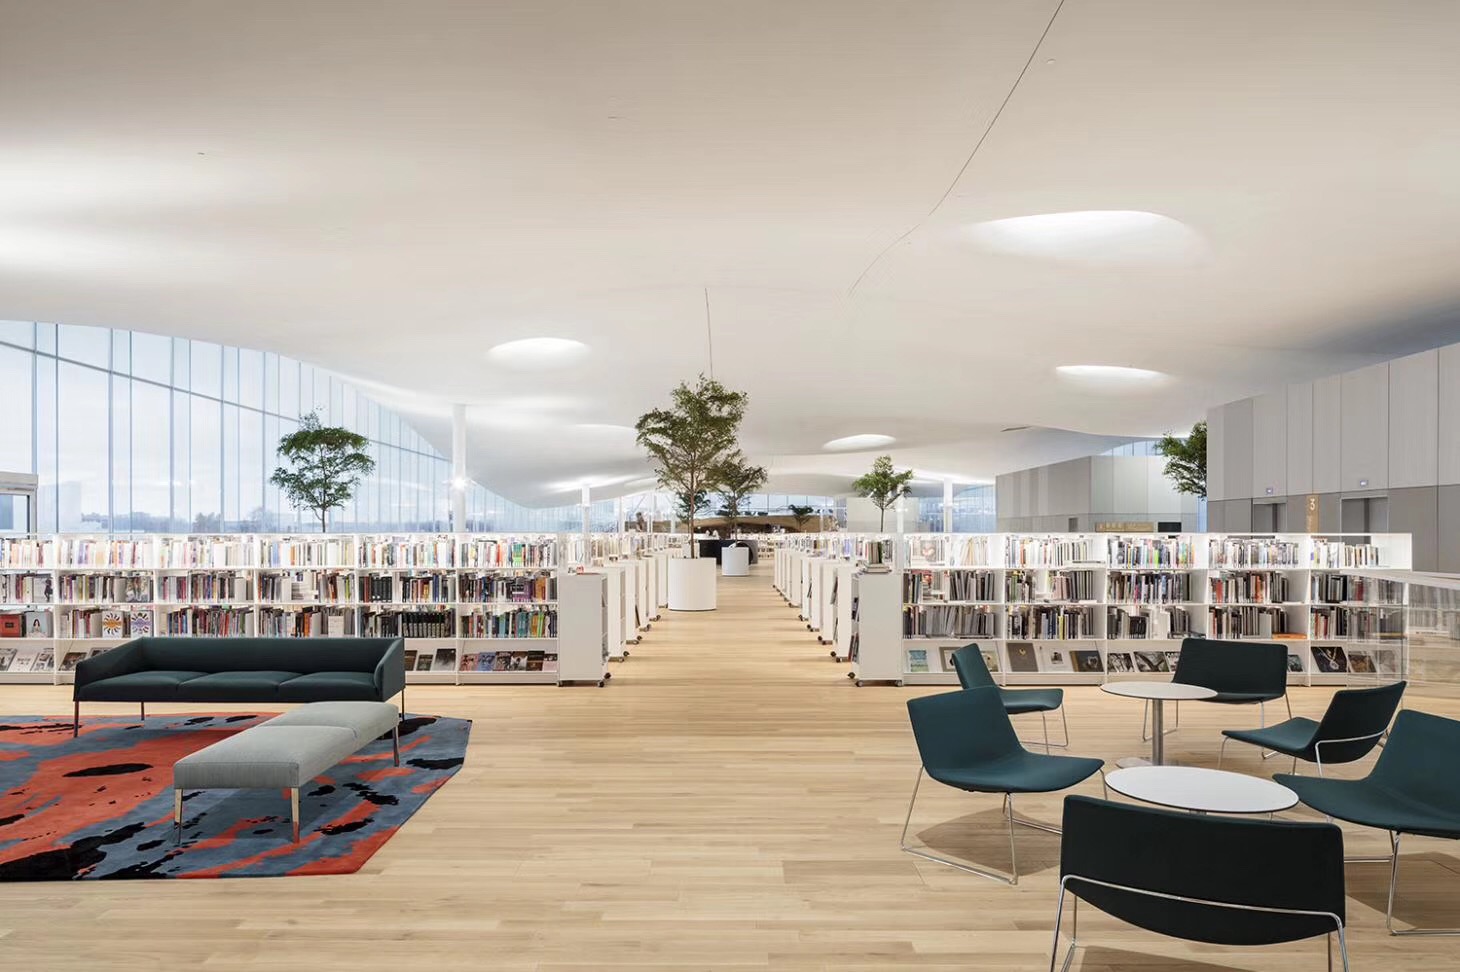 Helsinki opens a light-filled library as a national monument(图2)